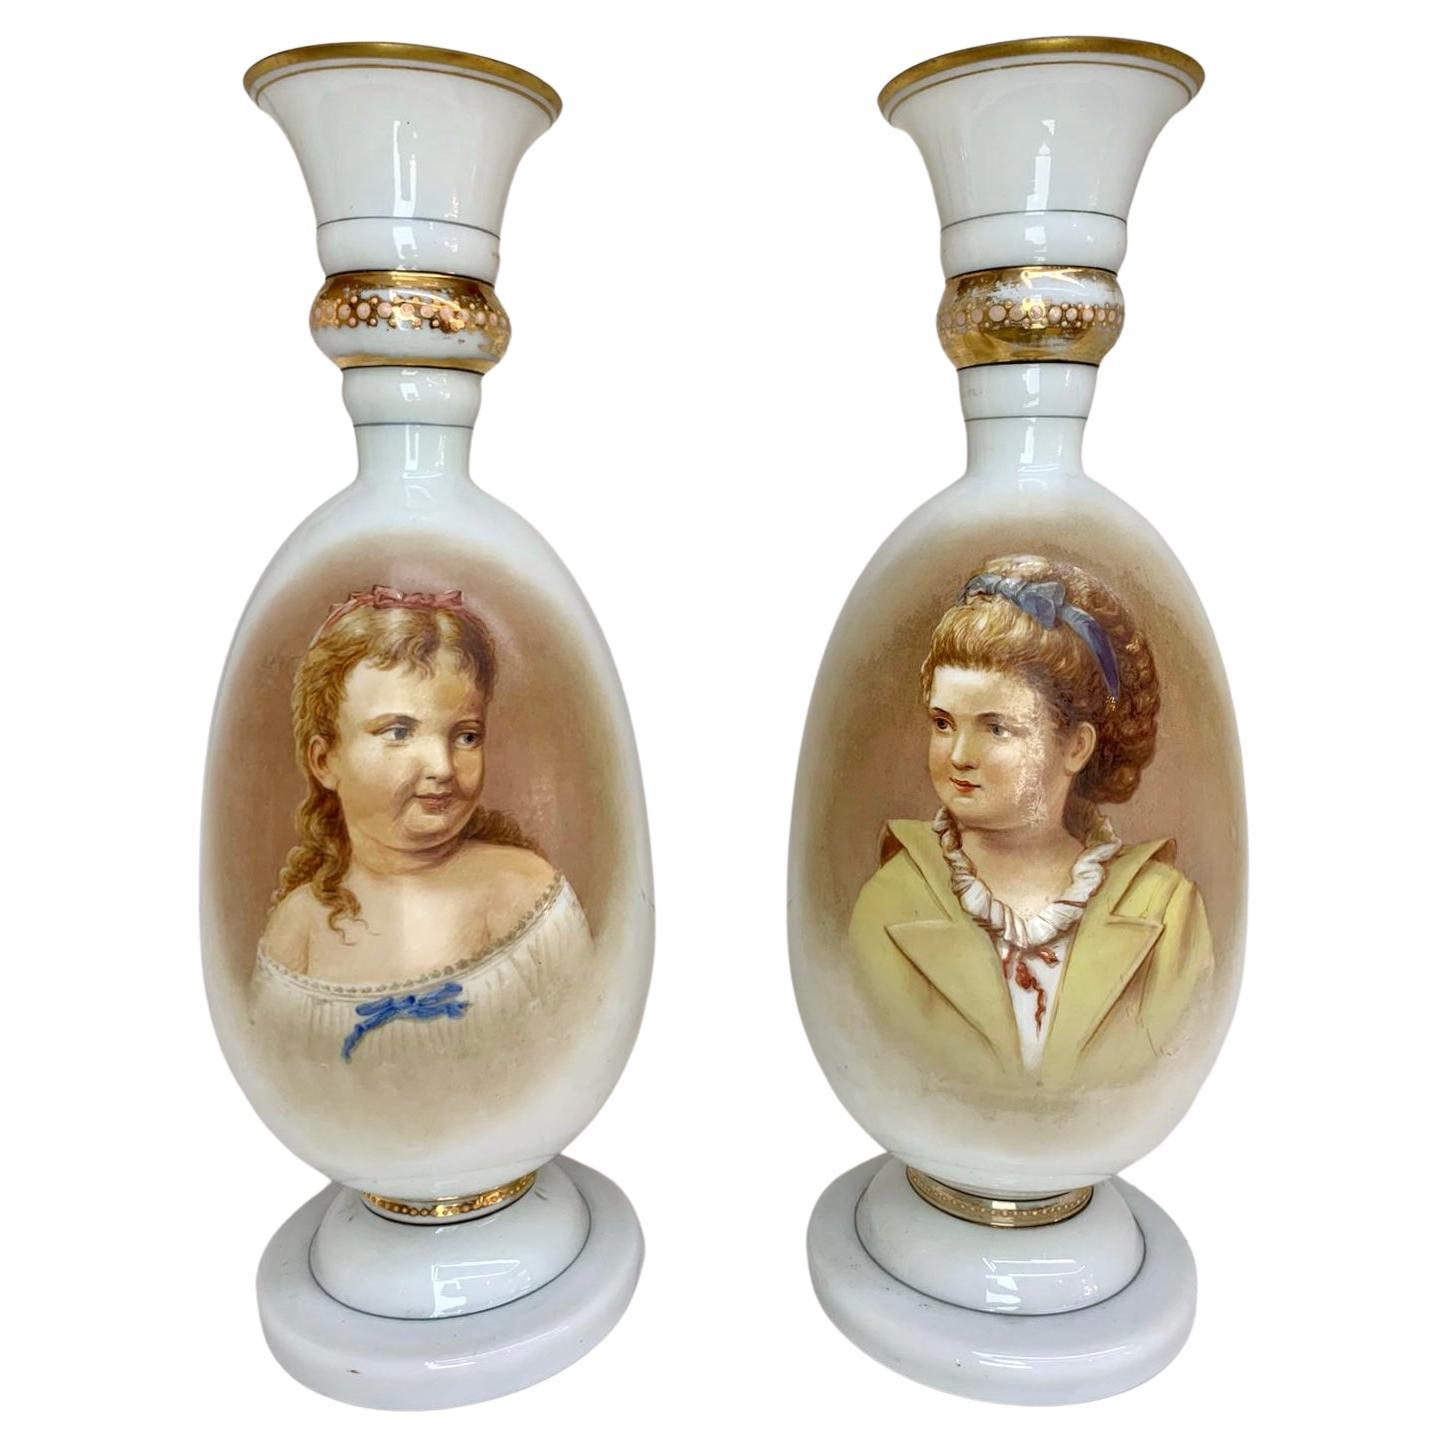 A pair of 19th Century Victorian milky white opaline glass vases with gilding highlights and hand-painted portraits

The vases feature high-quality royal portraits of two young girls looking at one another

Height 39 cm.